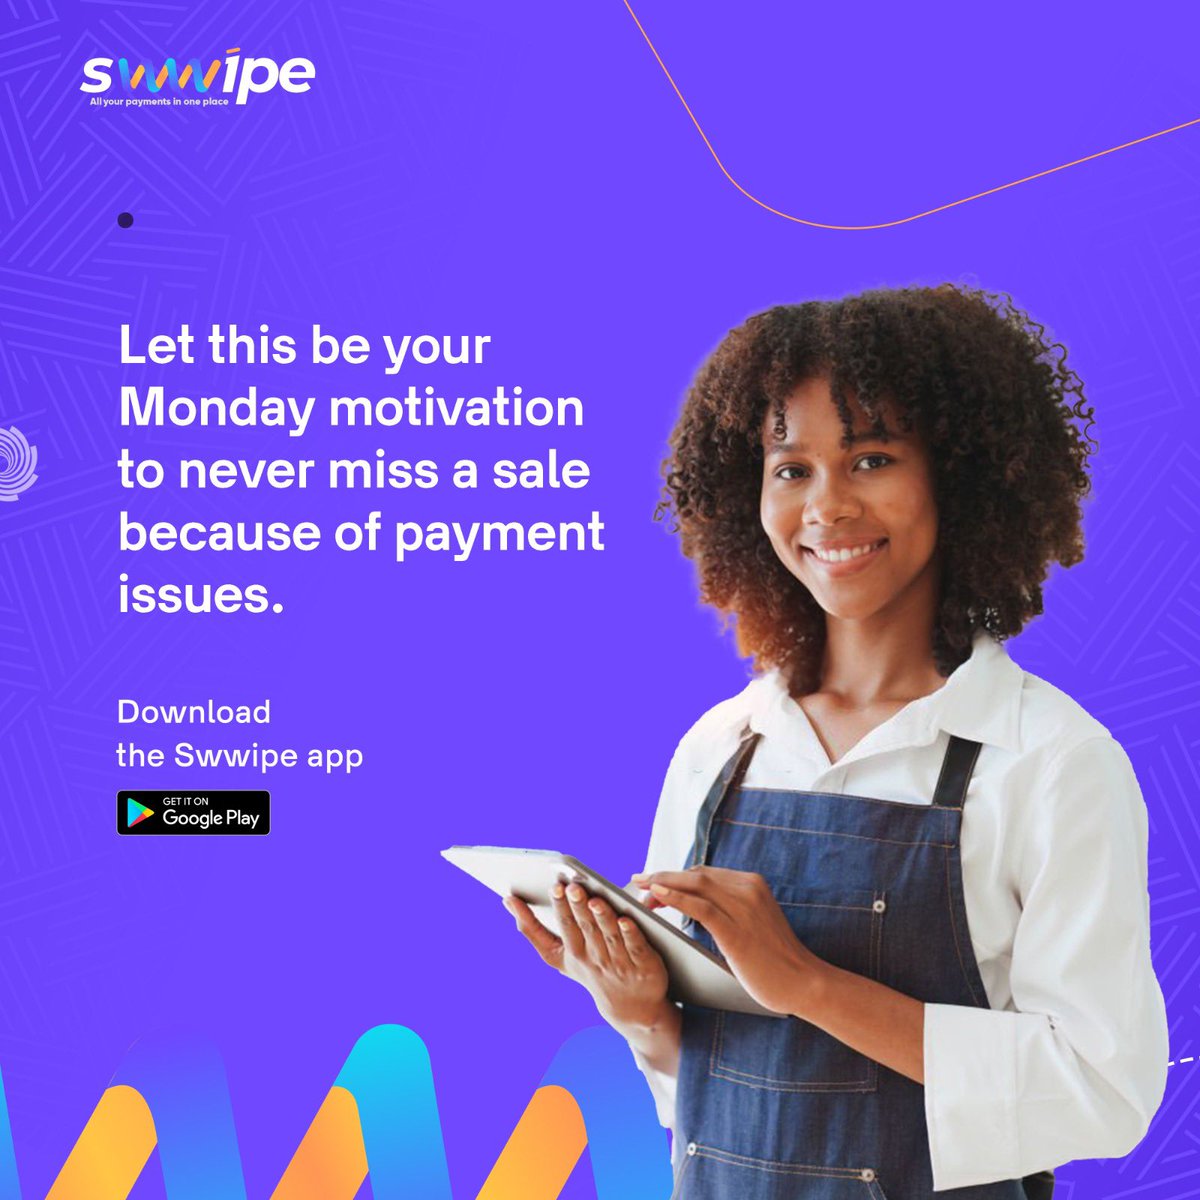 Kickstart your week with a winning mindset! 💼💯 

Don't let payment challenges hold your business back. Embrace solutions and seize every sales opportunity that comes your way. 

Download the Swwipe App today.

#MondayMotivation #SalesSuccess #businesssucess #entrepreneur